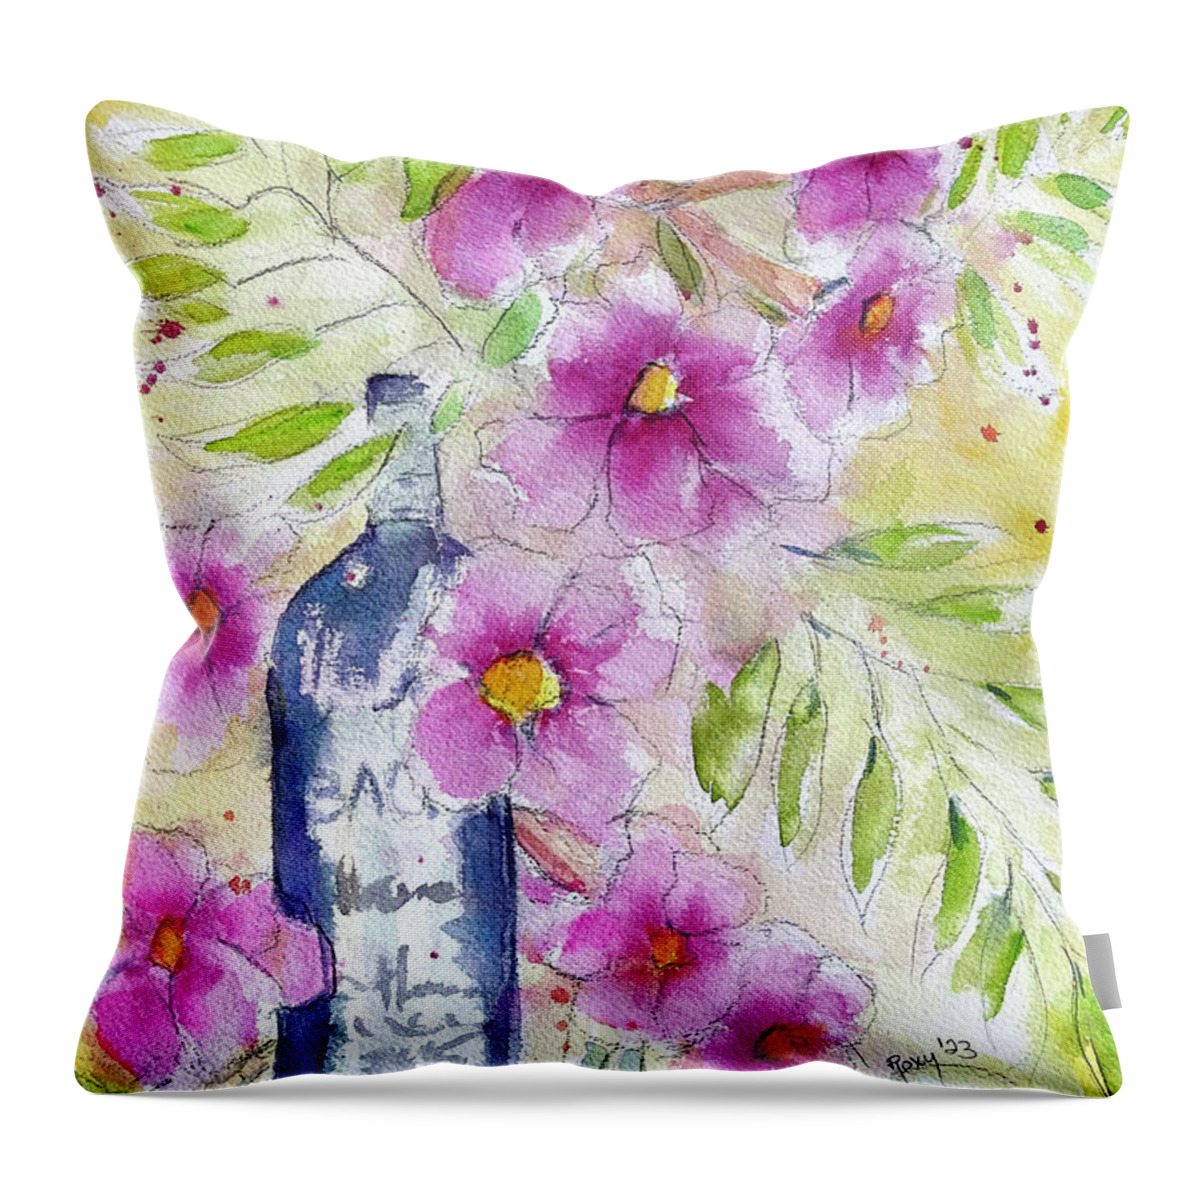 Wine Bottle Throw Pillow featuring the painting Bottle and Blooms by Roxy Rich